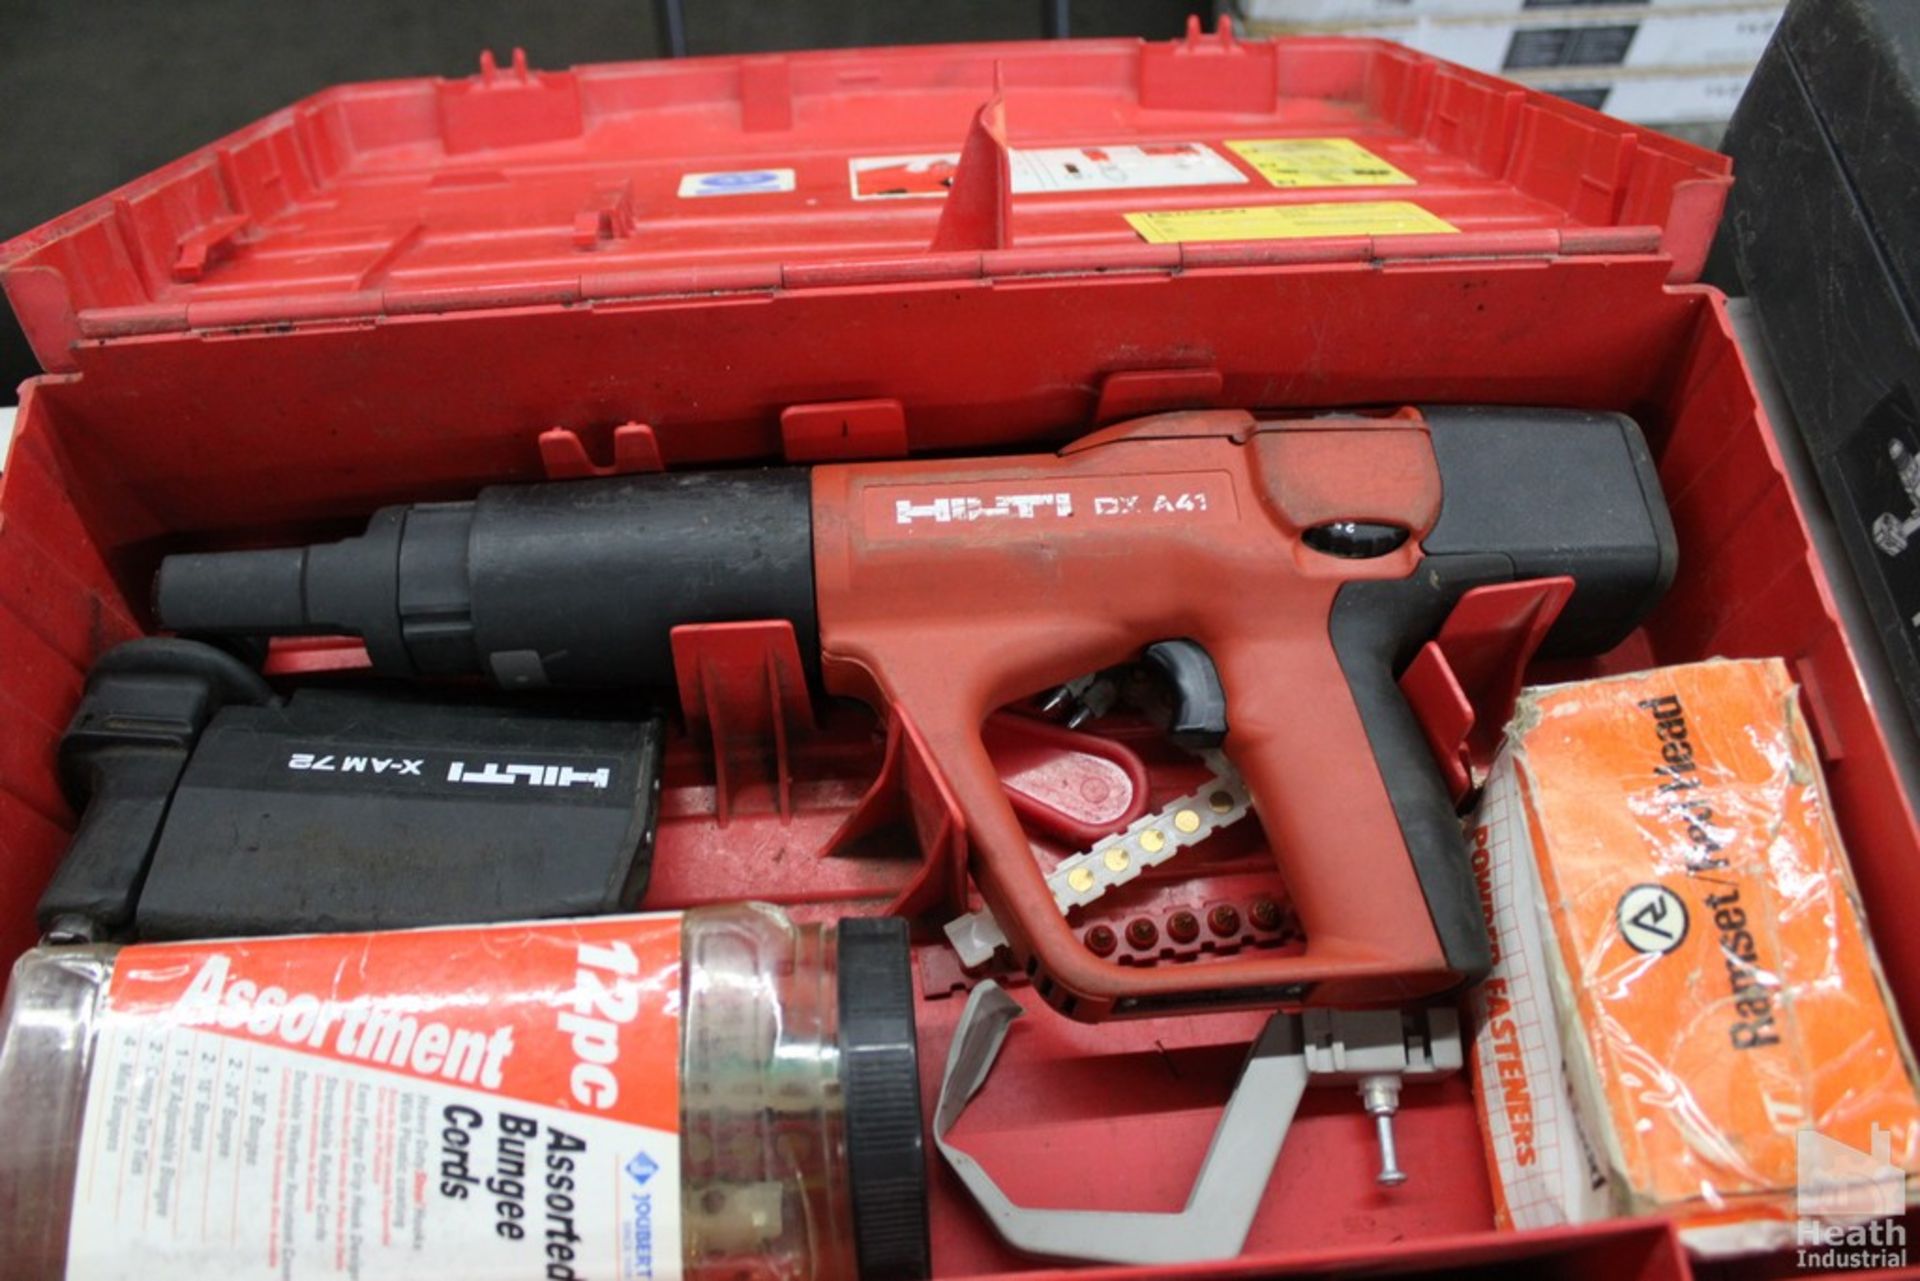 HILTI MODEL DX A41 POWDER ACTUATED NAIL DRIVER WITH CASE AND ACCESSORIES - Image 2 of 3